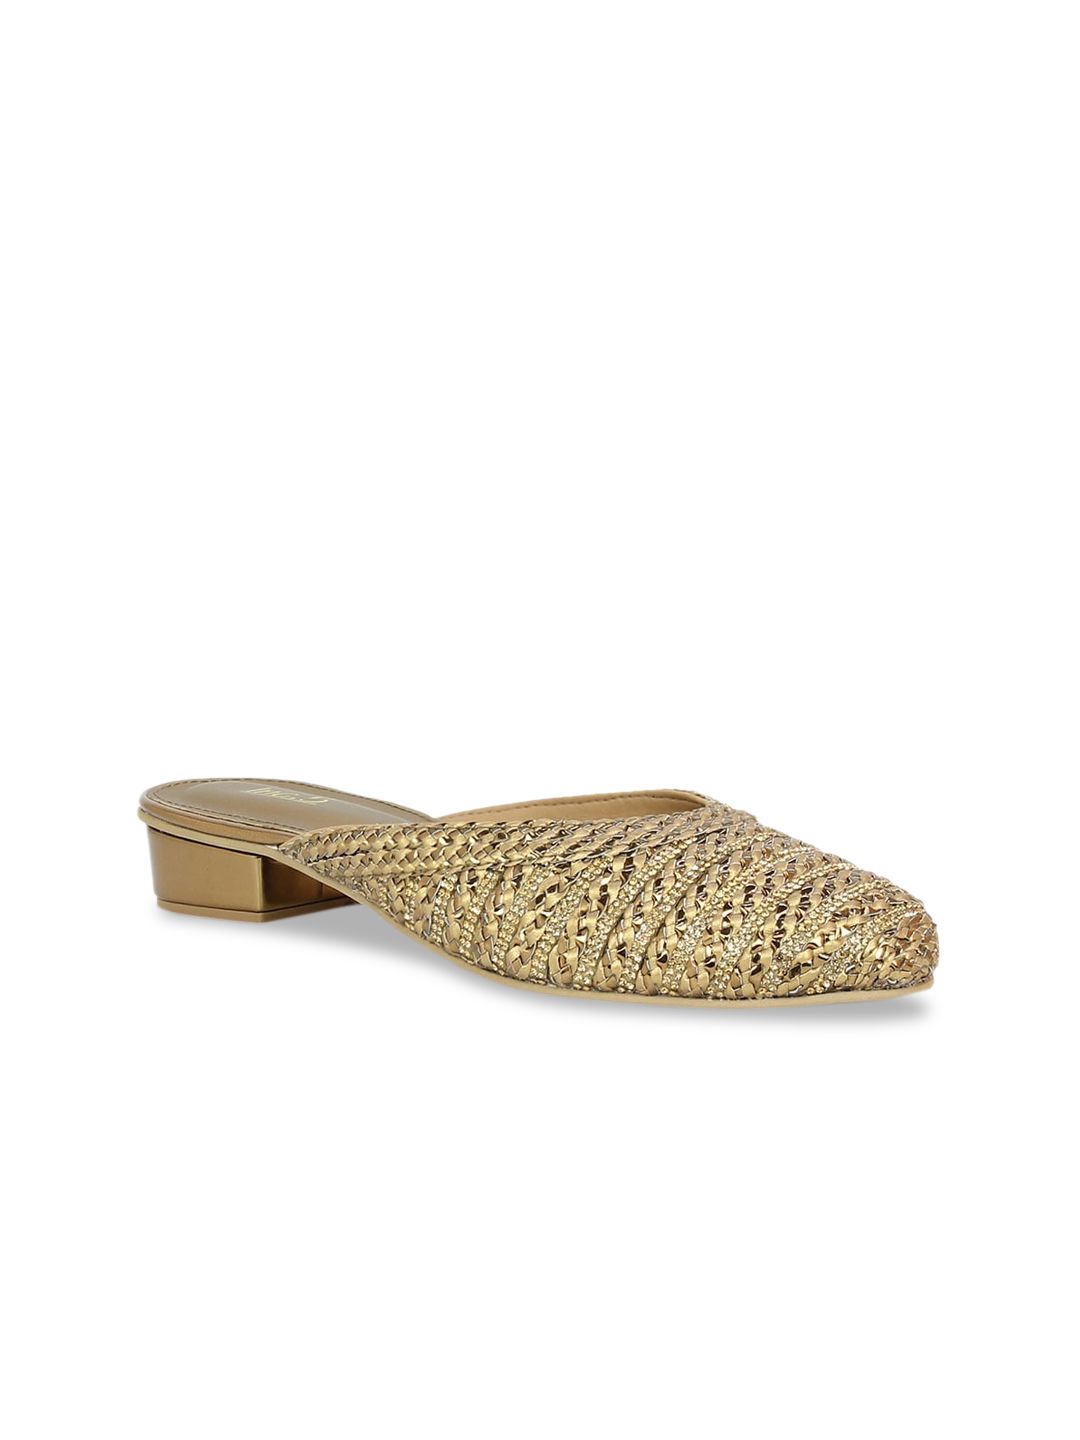 Inc 5 Women Gold-Toned Textured Mules Price in India